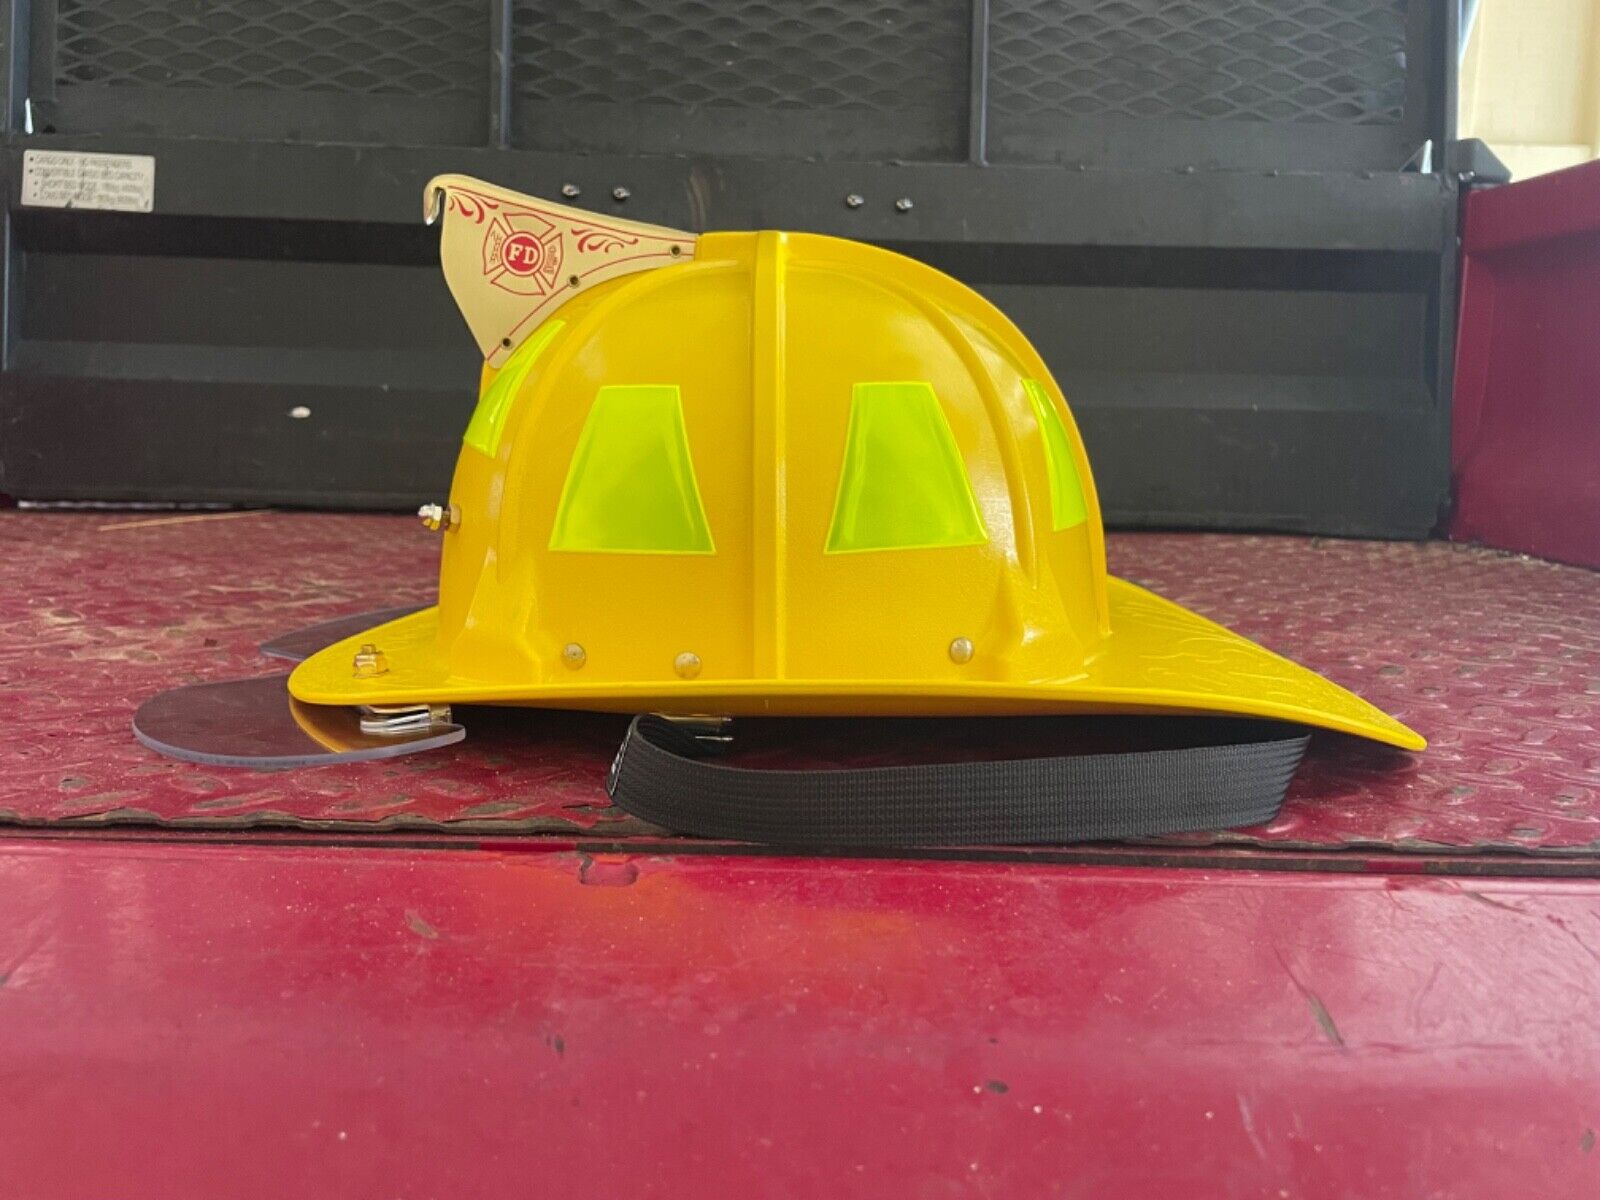 Cairns 880 Fire Helmet with retro conversion by Capital City Industries